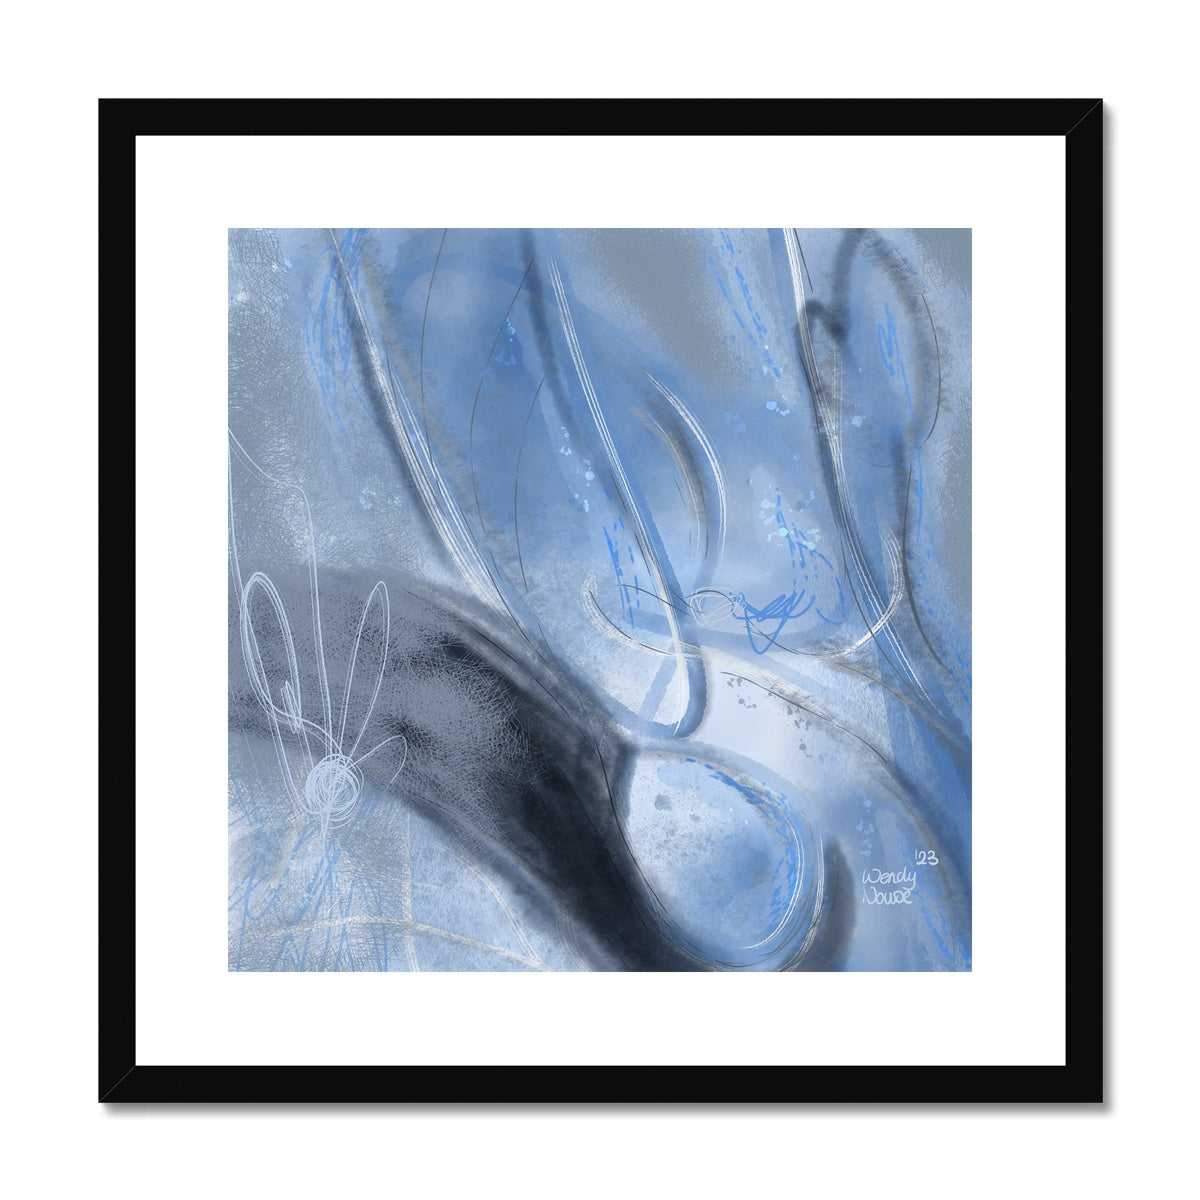 Compassion |  Framed & Mounted Print